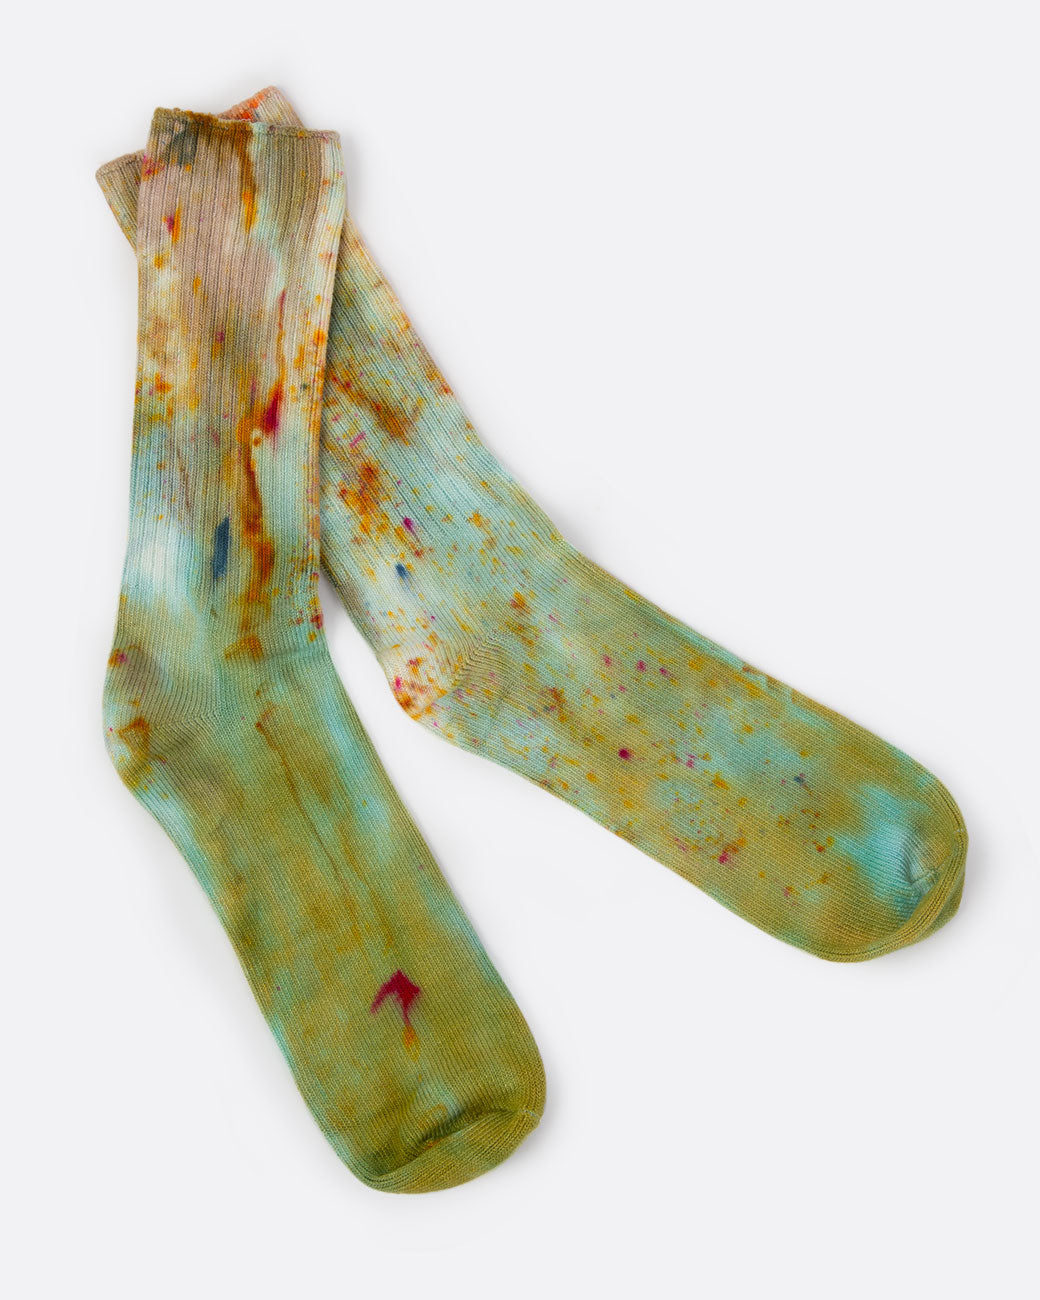 Hand dyed green socks, shown laying flat.